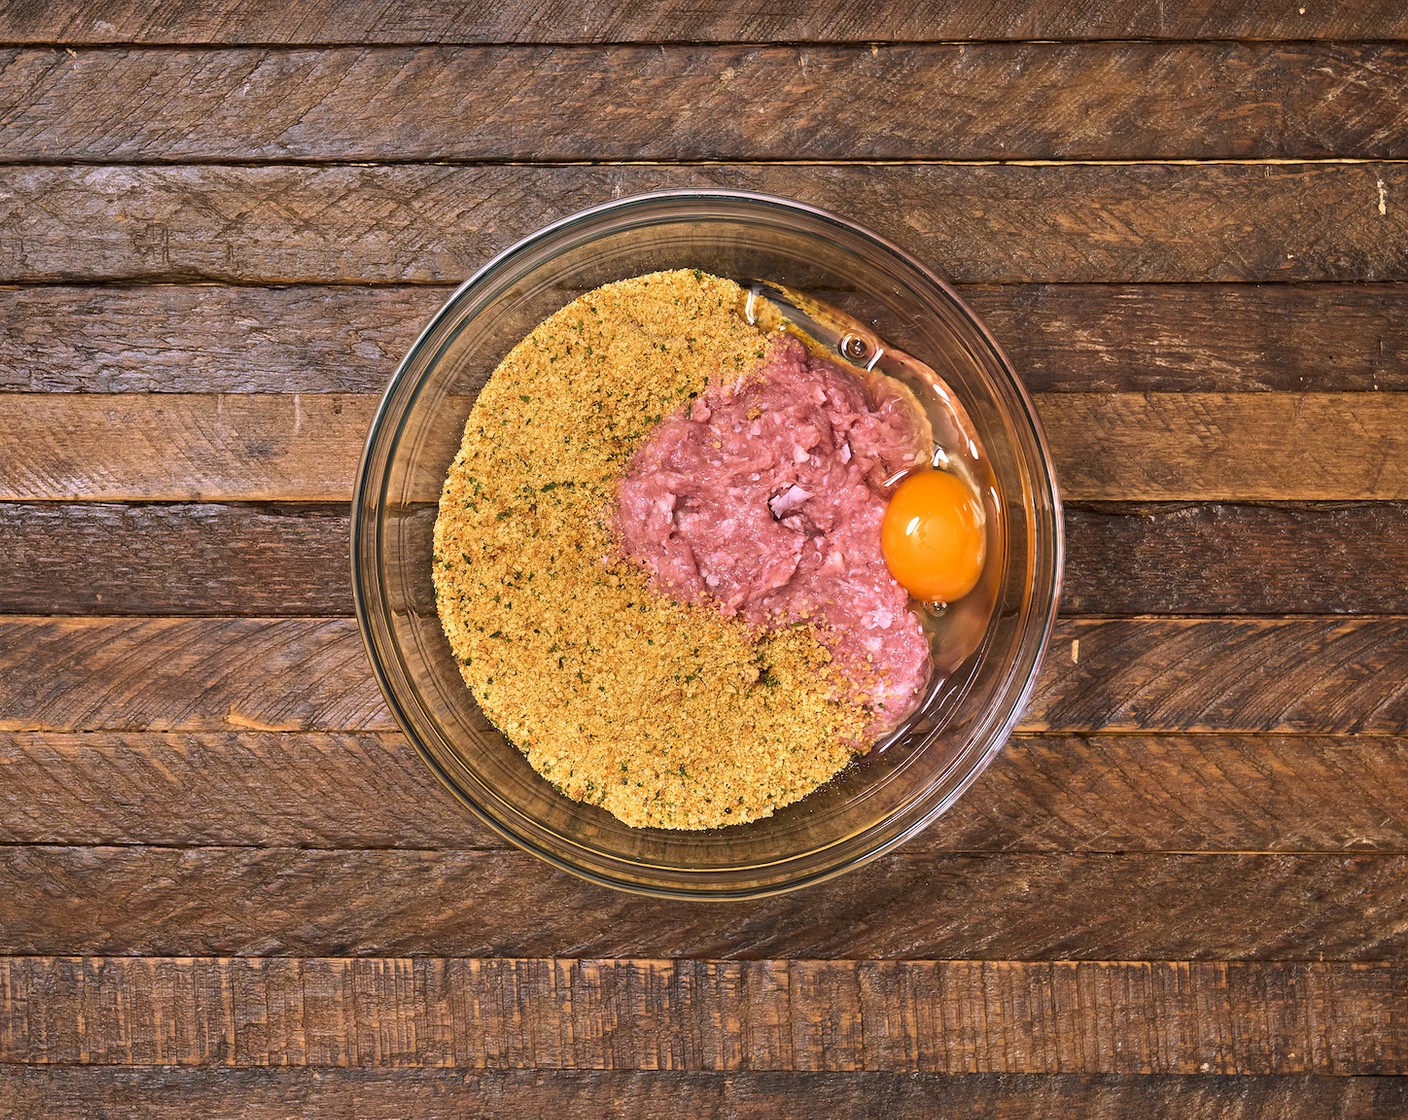 step 2 In a large mixing bowl, add Ground Turkey (1 lb), Italian-Style Breadcrumbs (1/2 cup), Egg (1), McCormick® Garlic Powder (1/2 tsp), Onion Powder (1/2 tsp), Salt (1 tsp), and Ground Black Pepper (to taste). Mix well using gloved hands or a spoon and form into 1-inch-sized meatballs.